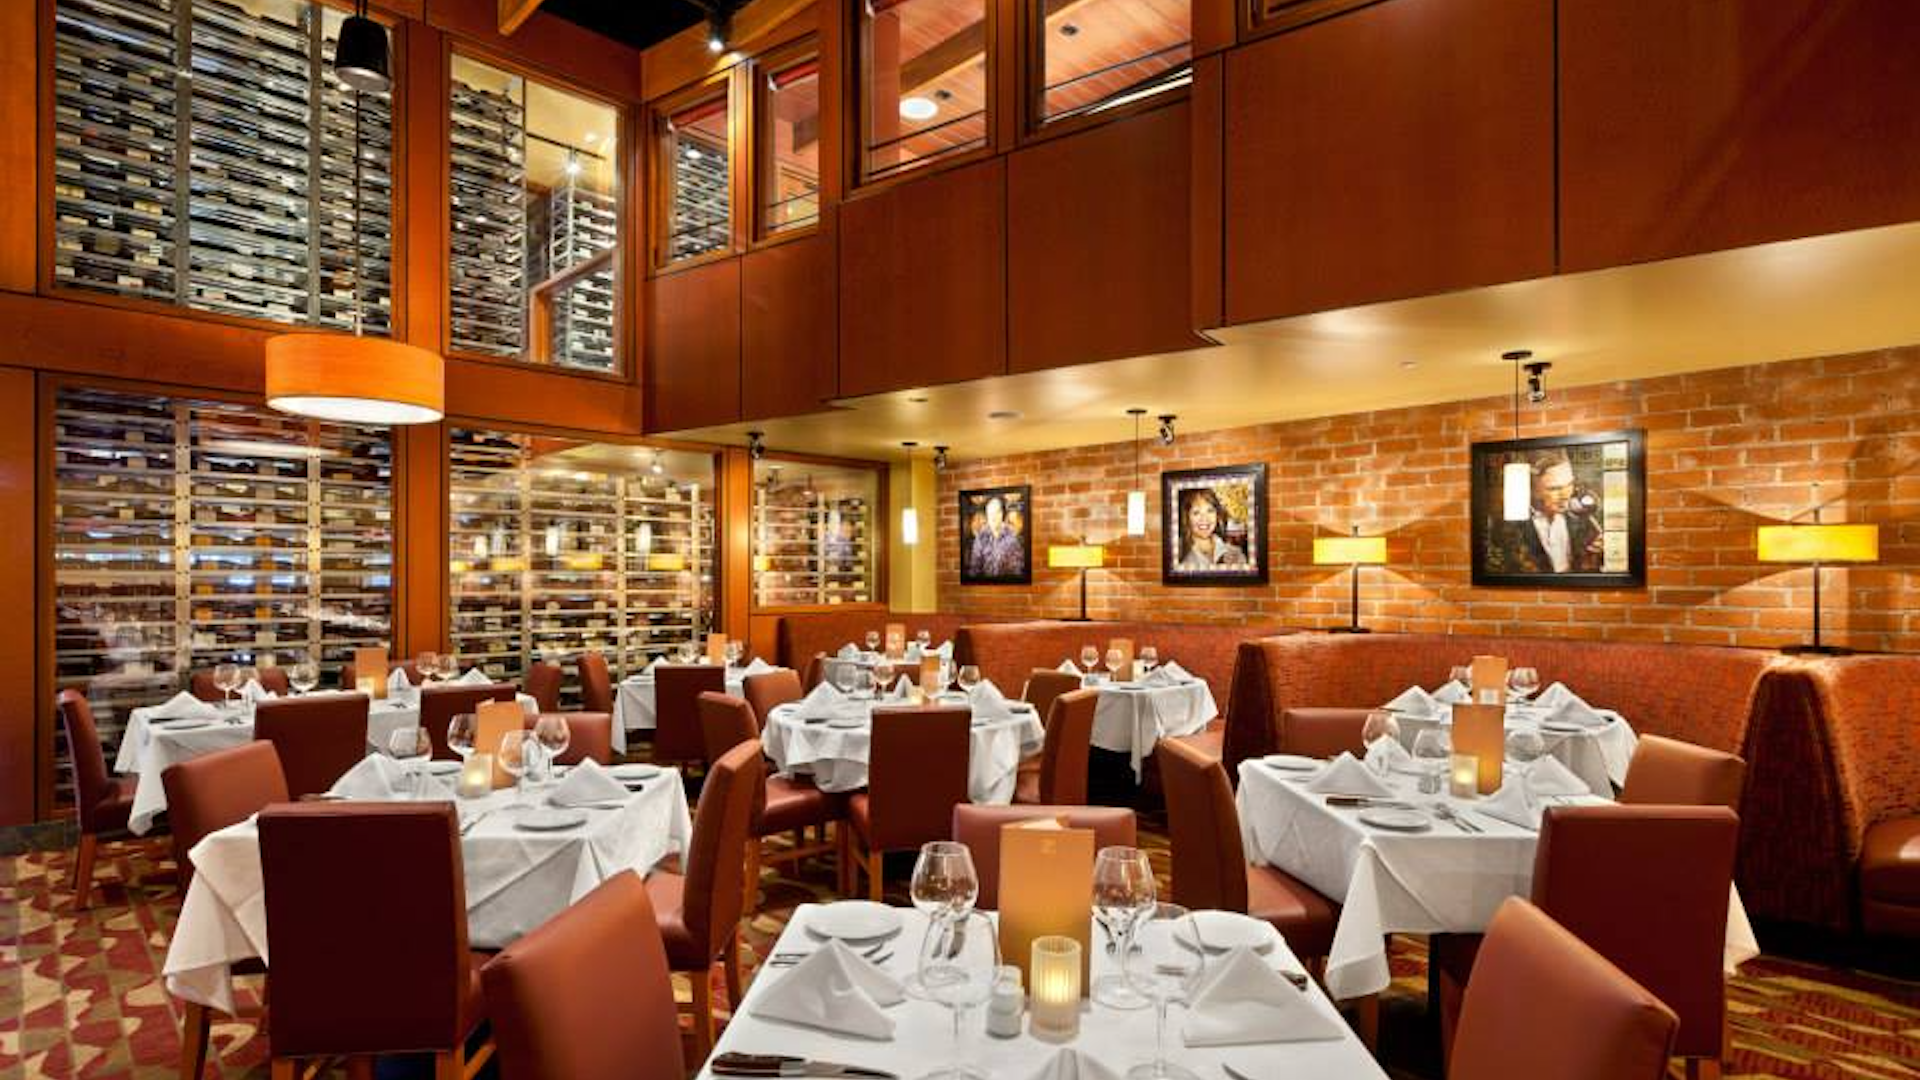 interior or a steak restaurant with tables with white linen covers.